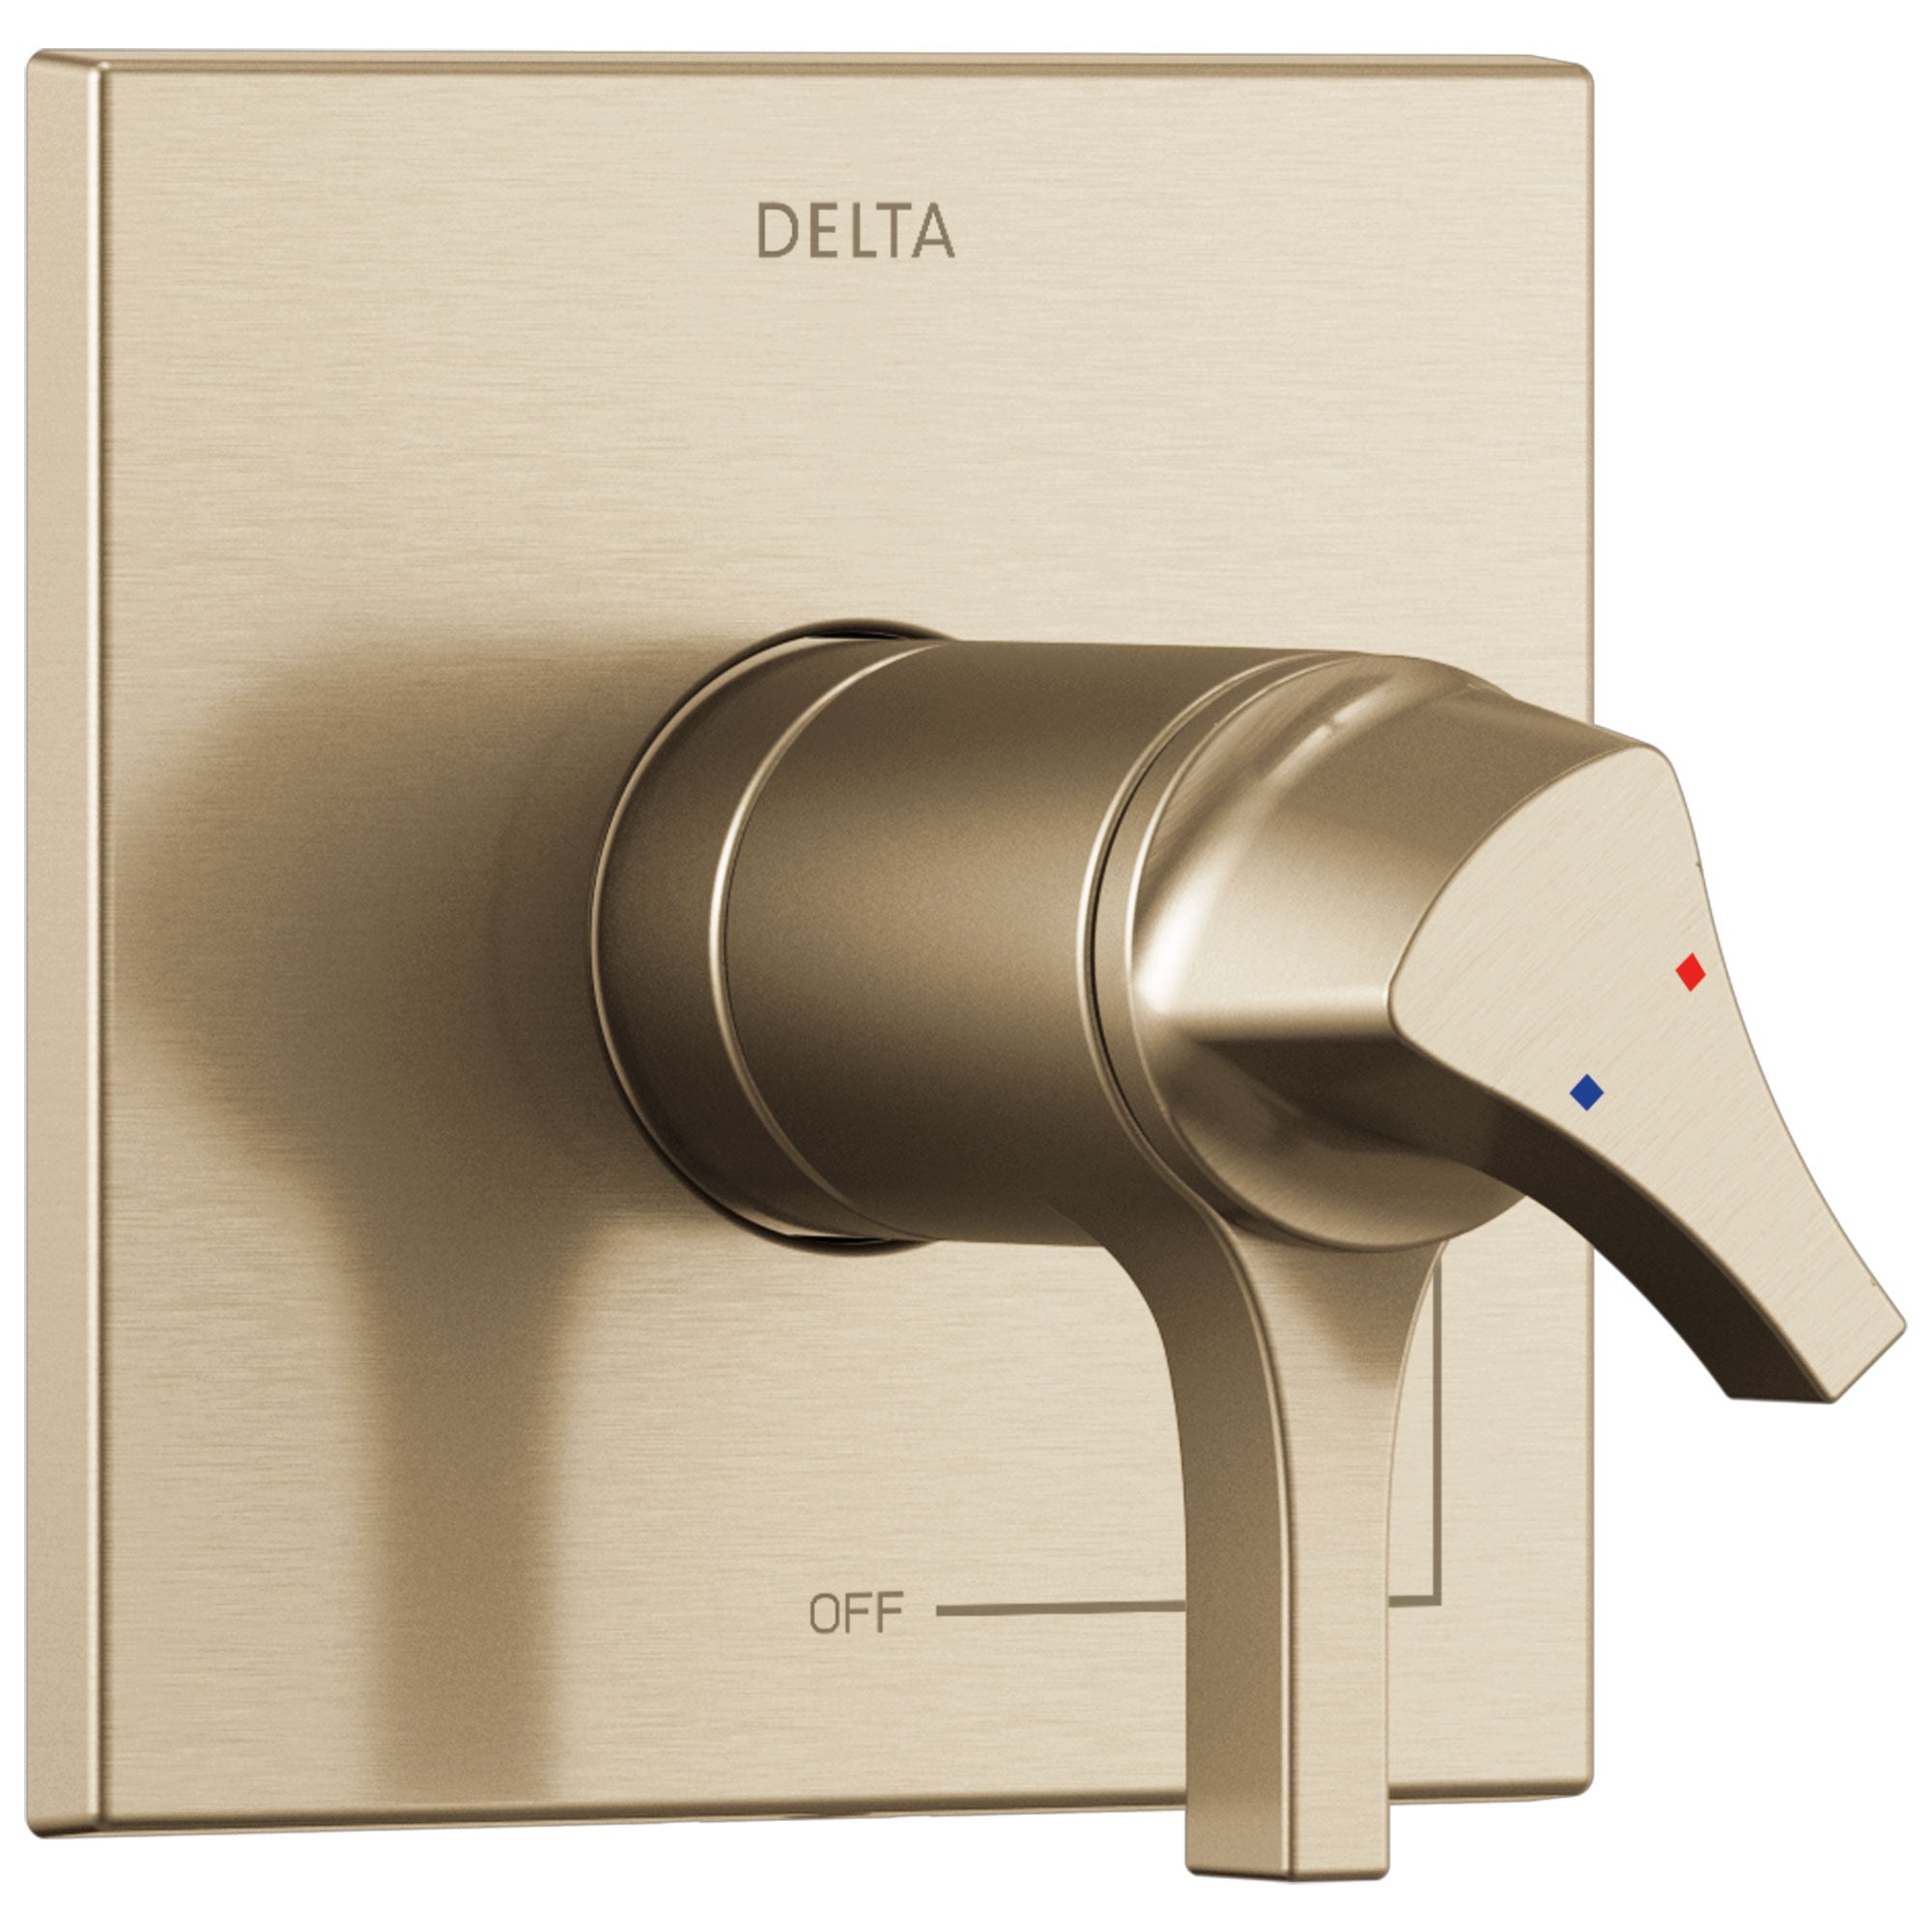 Delta Zura Champagne Bronze Finish Thermostatic Shower Faucet Control Only Includes 17T Cartridge, Handles, and Valve without Stops D3317V